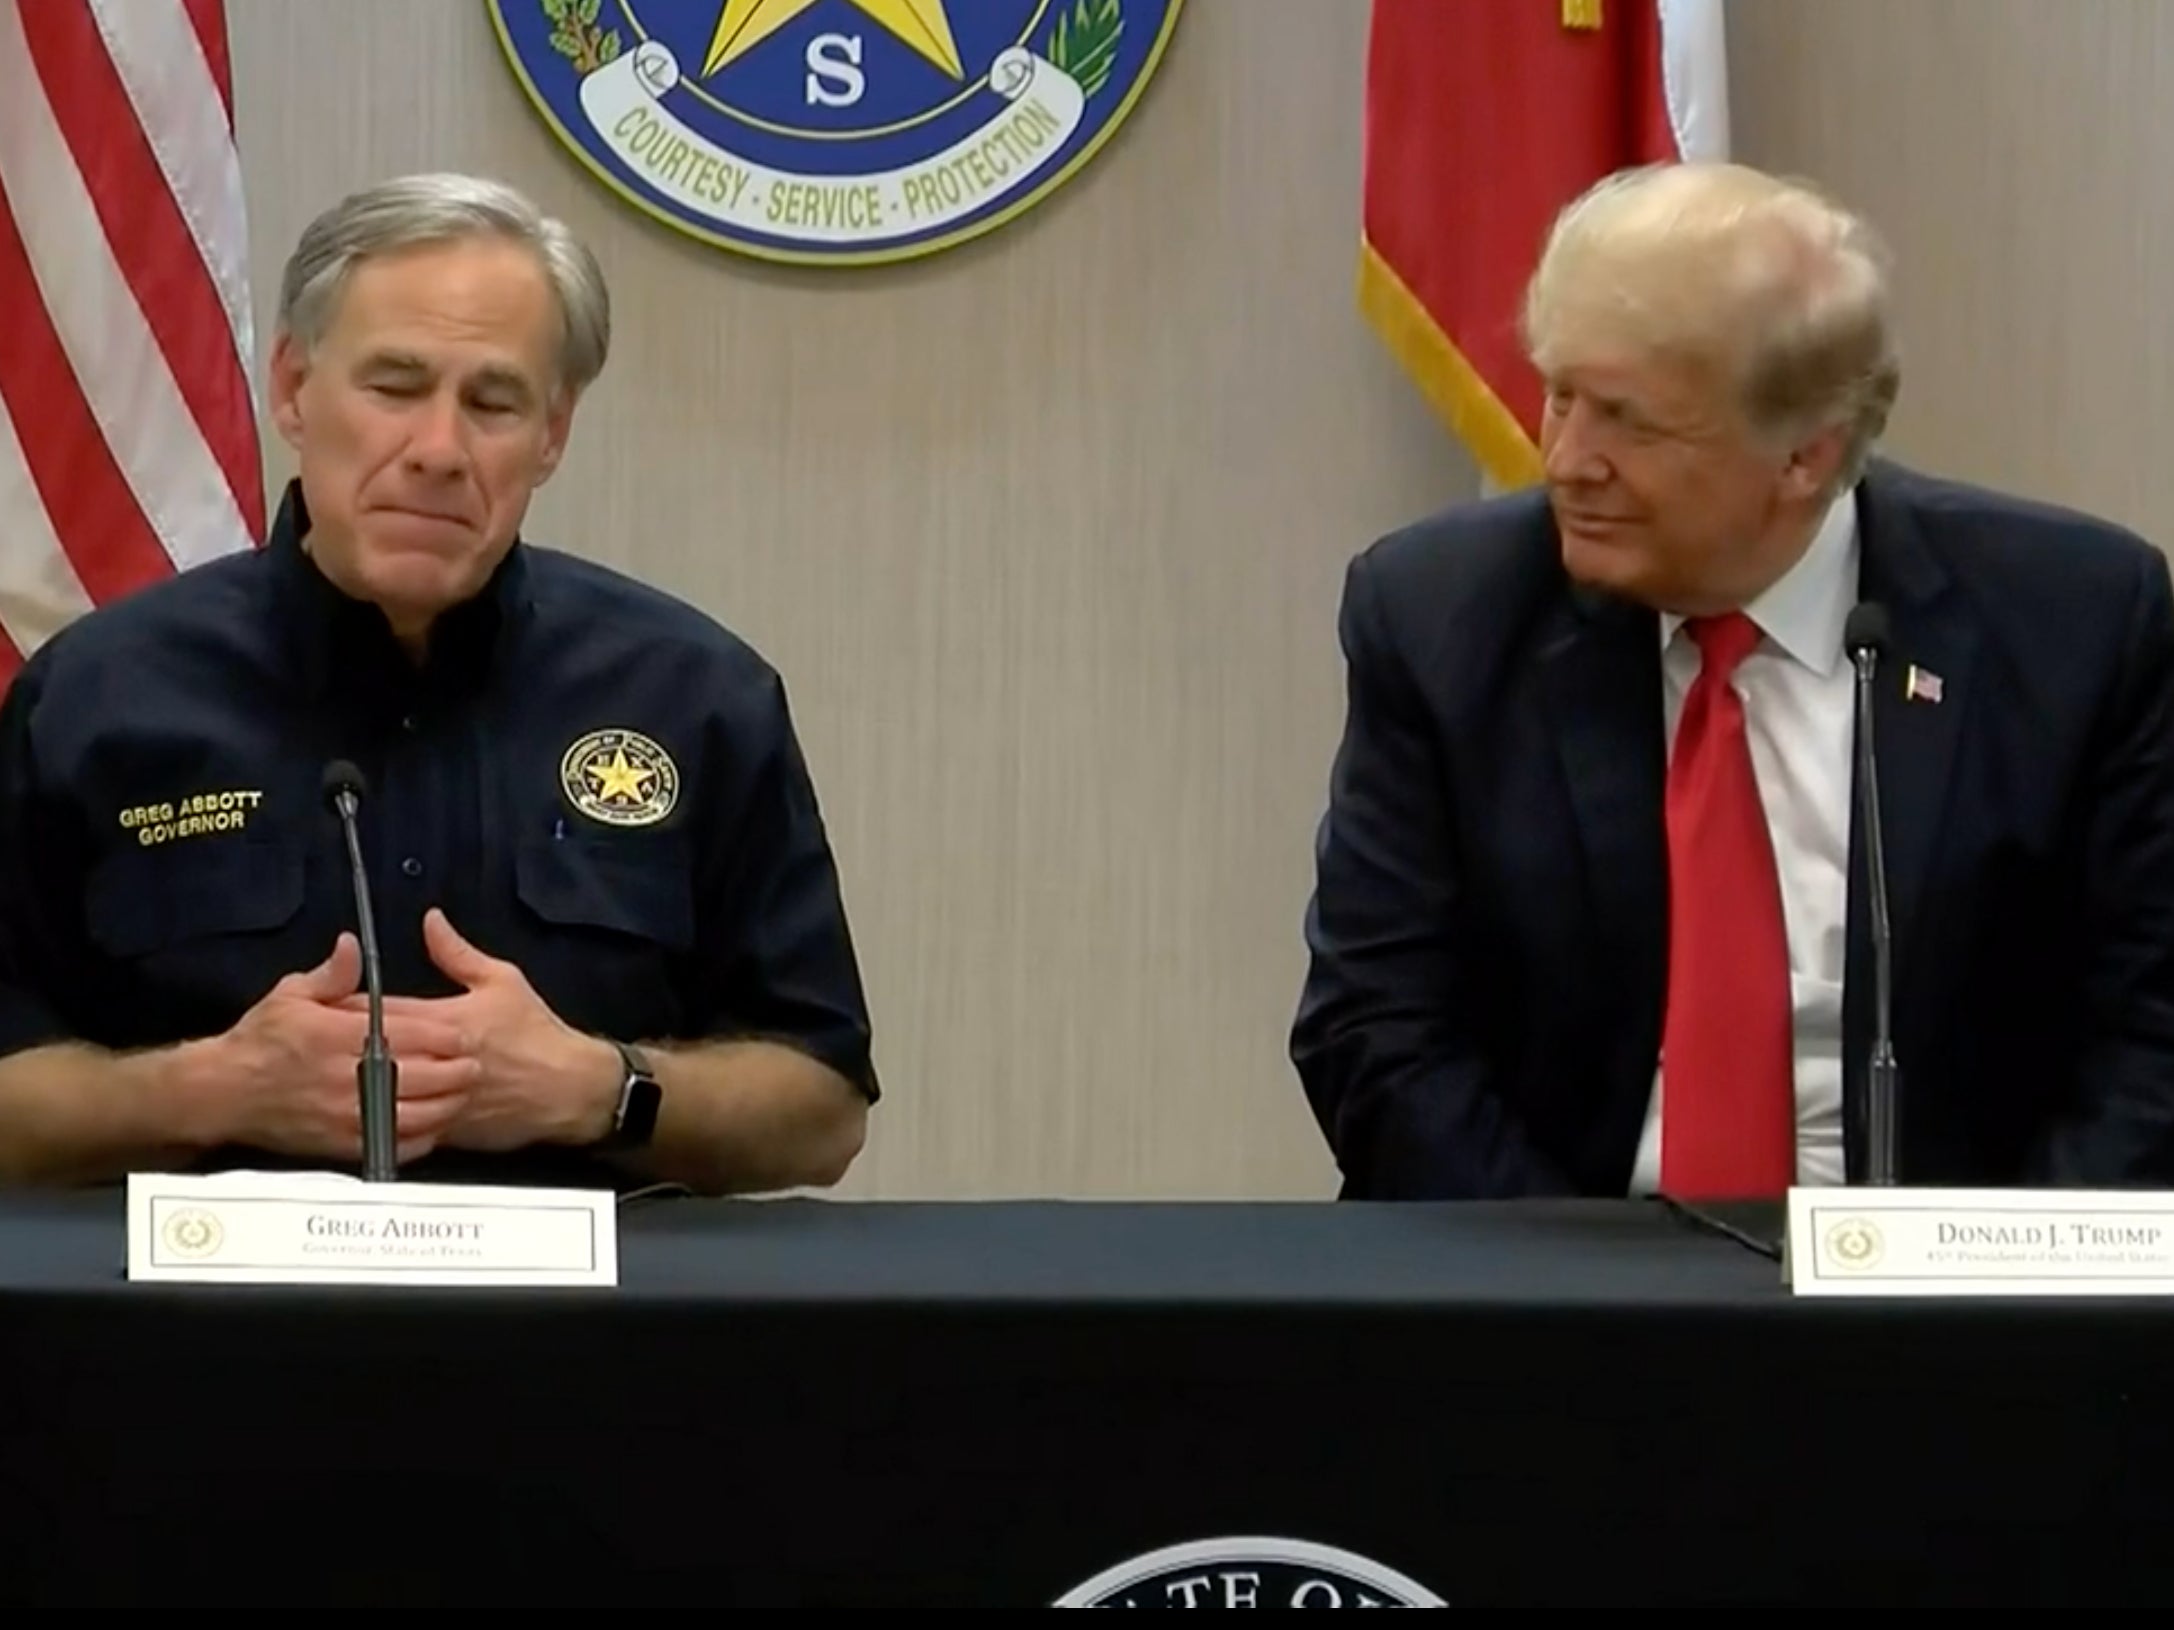 Texas governor Greg Abbott introduces former president Donald Trump at a meeting about the border